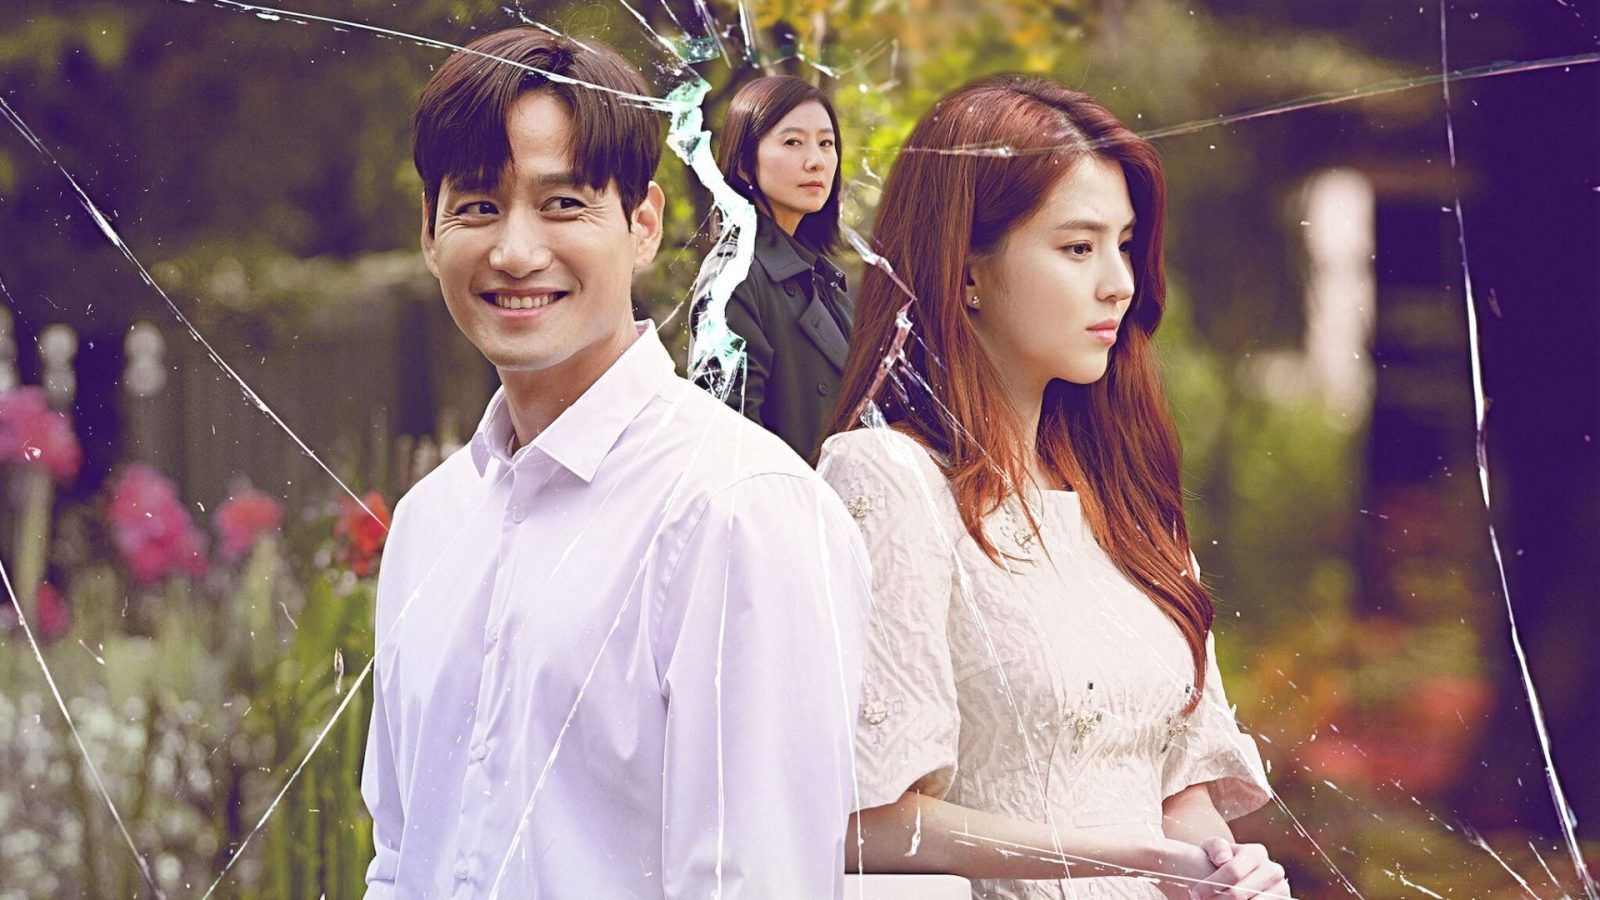 Watch the brand-new teaser for upcoming K-drama 'Love All Play